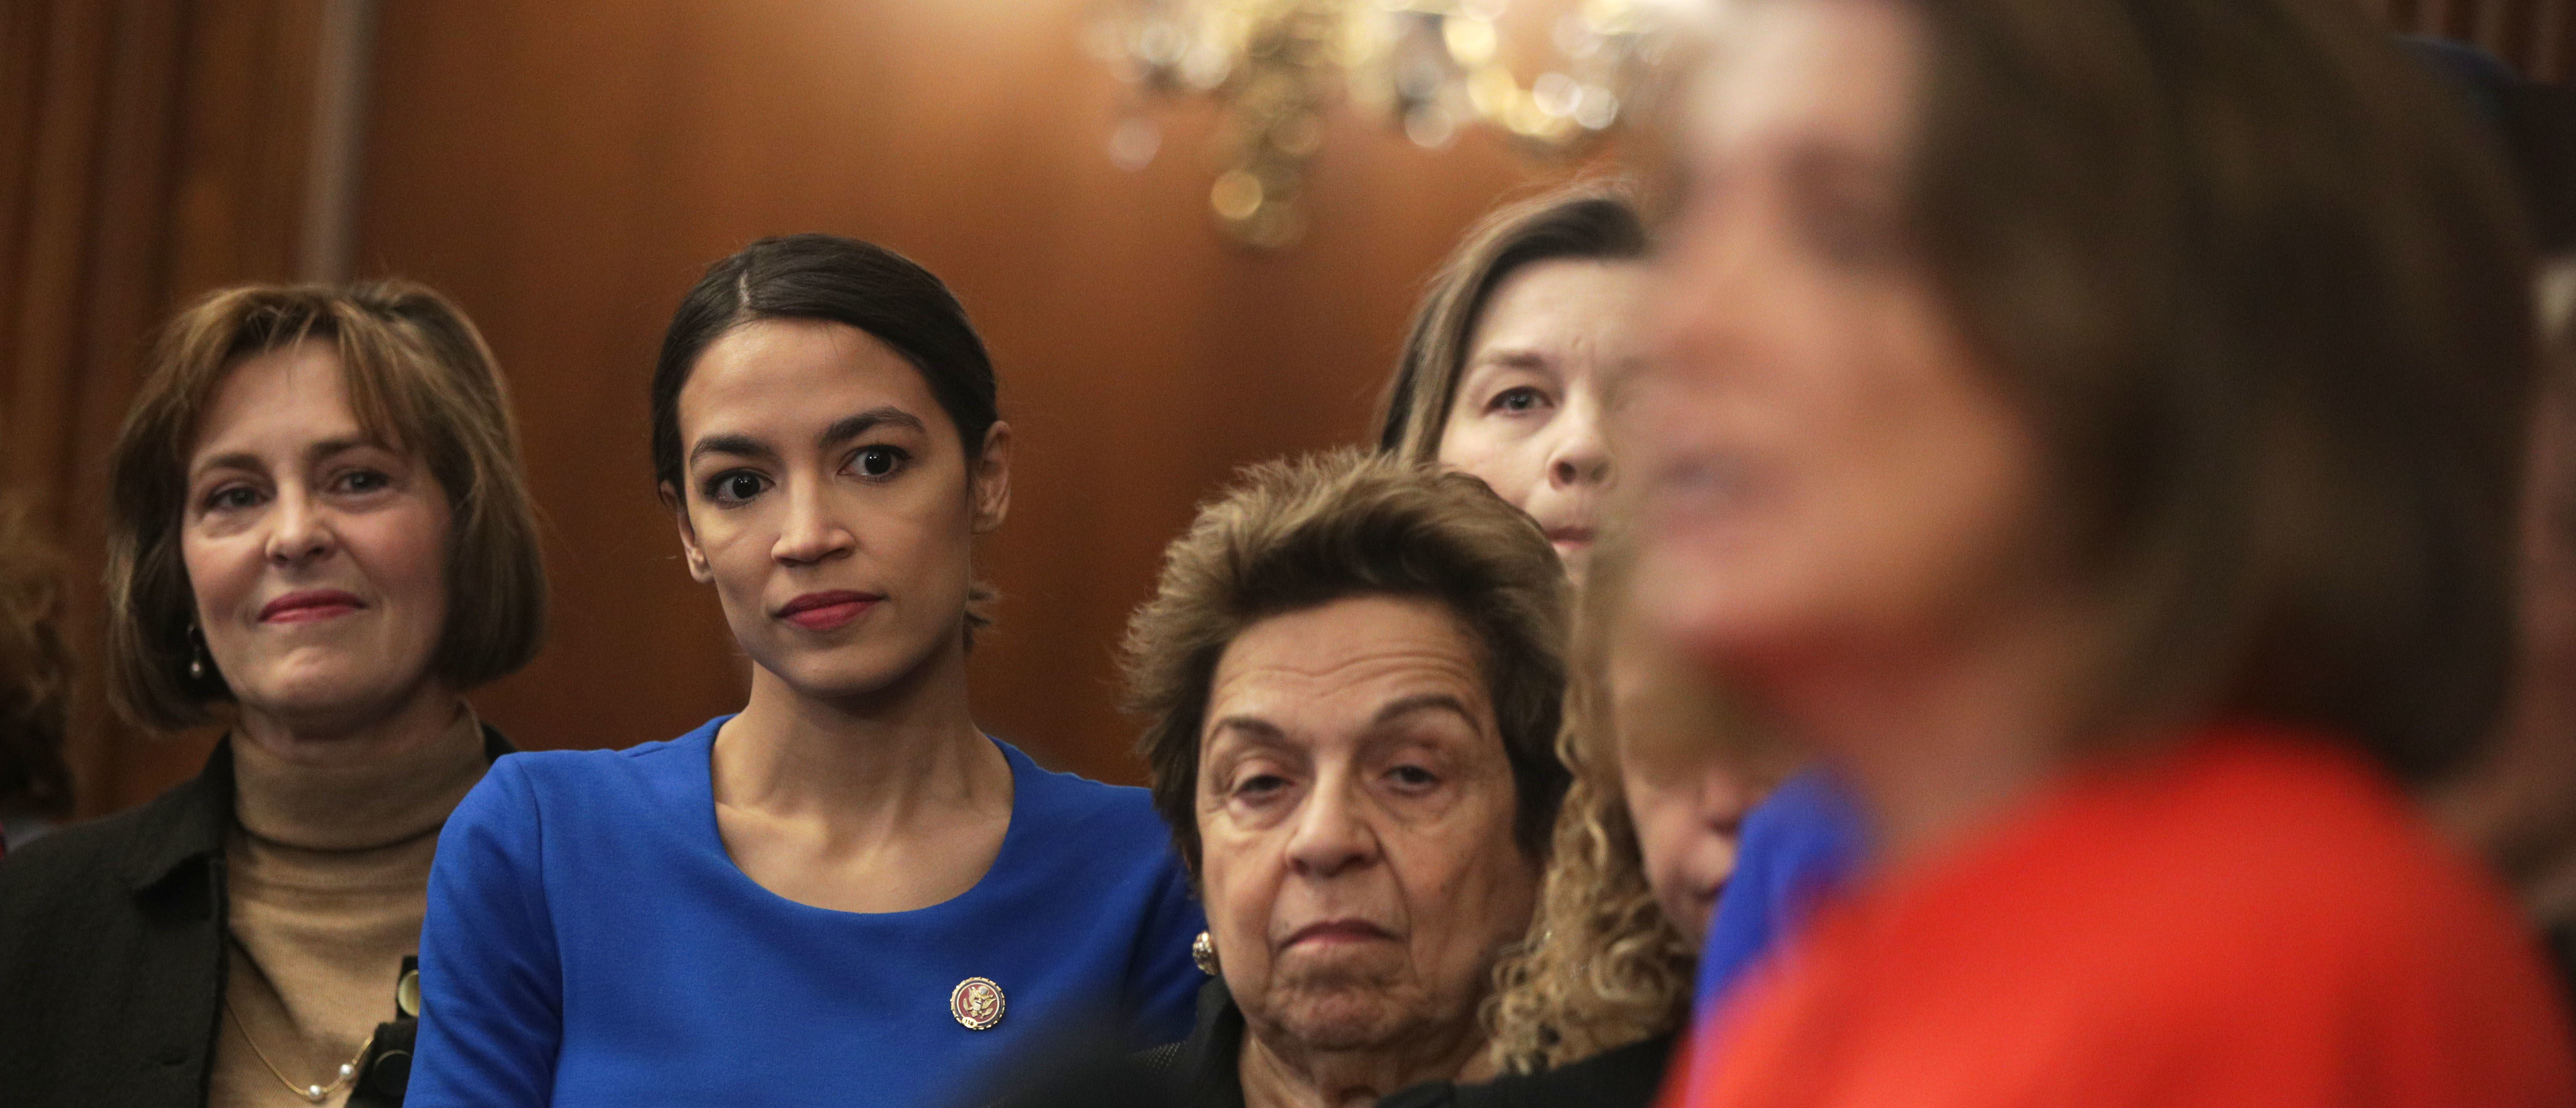 WASHINGTON, DC - JANUARY 30: (L-R) U.S. Rep. Kathy Castor (D-FL), Rep. Alexandria Ocasio-Cortez (D-NY), and Rep. Donna Shalala (D-FL) listen as Speaker of the House Rep. Nancy Pelosi (D-CA) speaks during a news conference at the U.S. Capitol January 30, 2019 in Washington, DC. House Democrats held a news conference to introduce the "Paycheck Fairness Act." (Photo by Alex Wong/Getty Images)